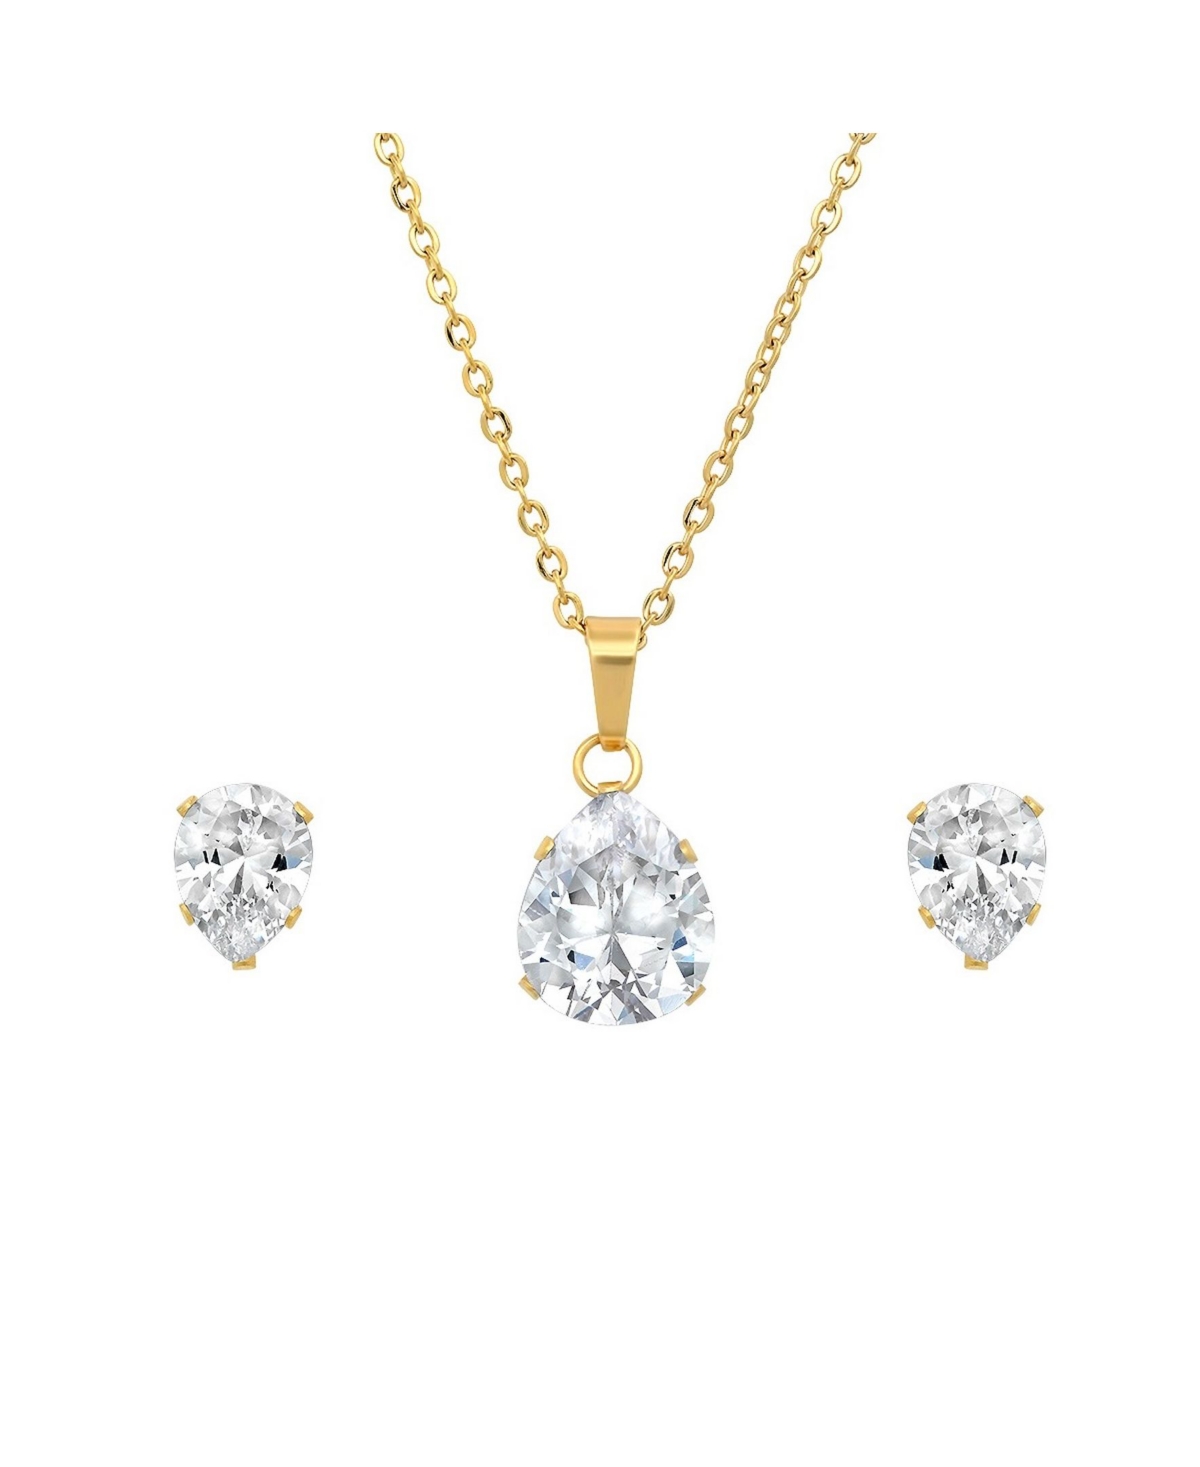 18K Micron Gold Plated Stainless Steel Pear Shaped Pendant Necklace Set, 2 Piece - Gold-Plated